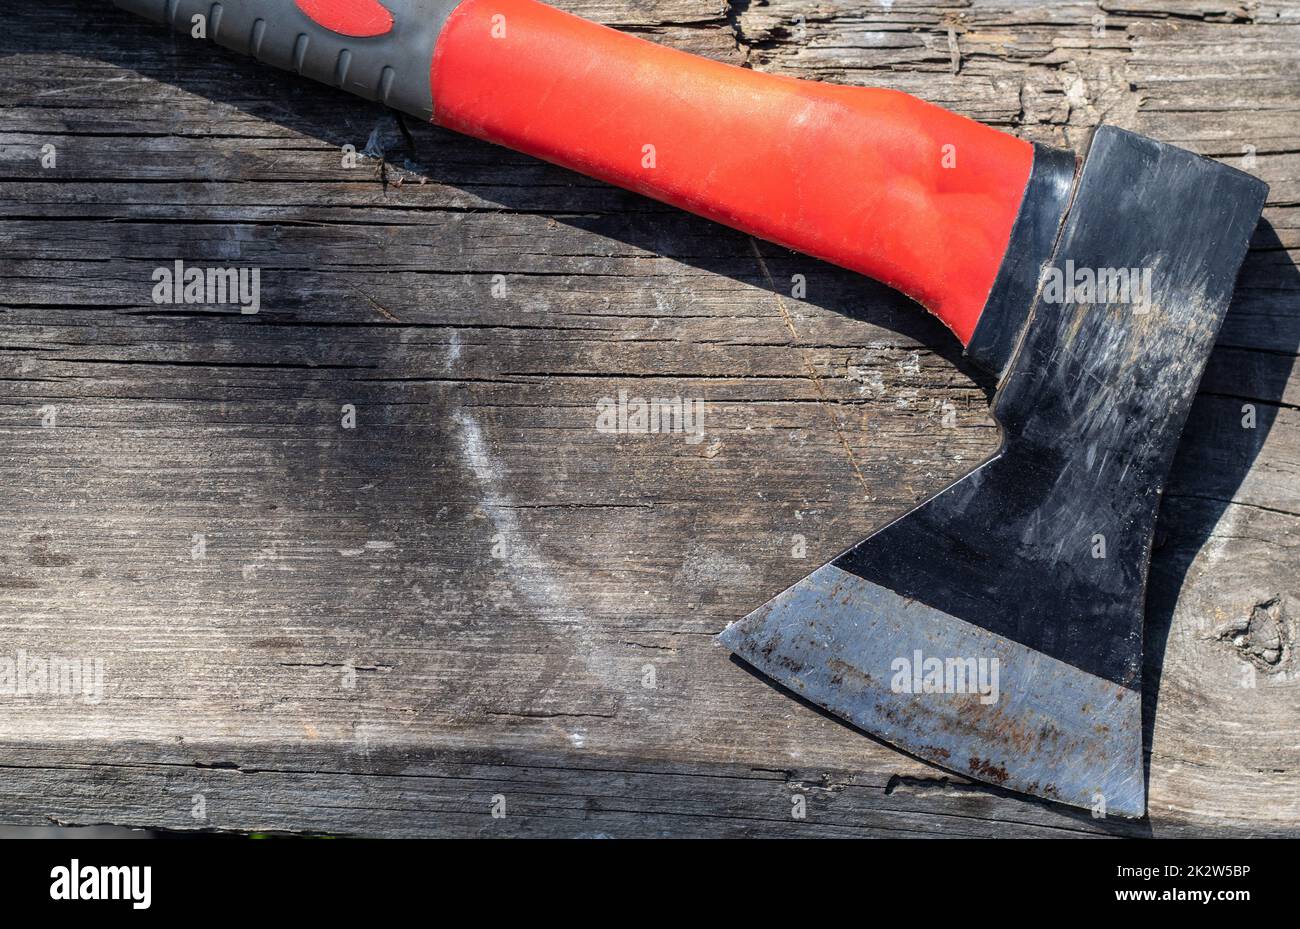 A sharp ax with an ergonomic rubberized handle on a wooden background. The ax is intended for rough, rough processing of wood. Has a forged heat treated carbon steel wedge. Stock Photo